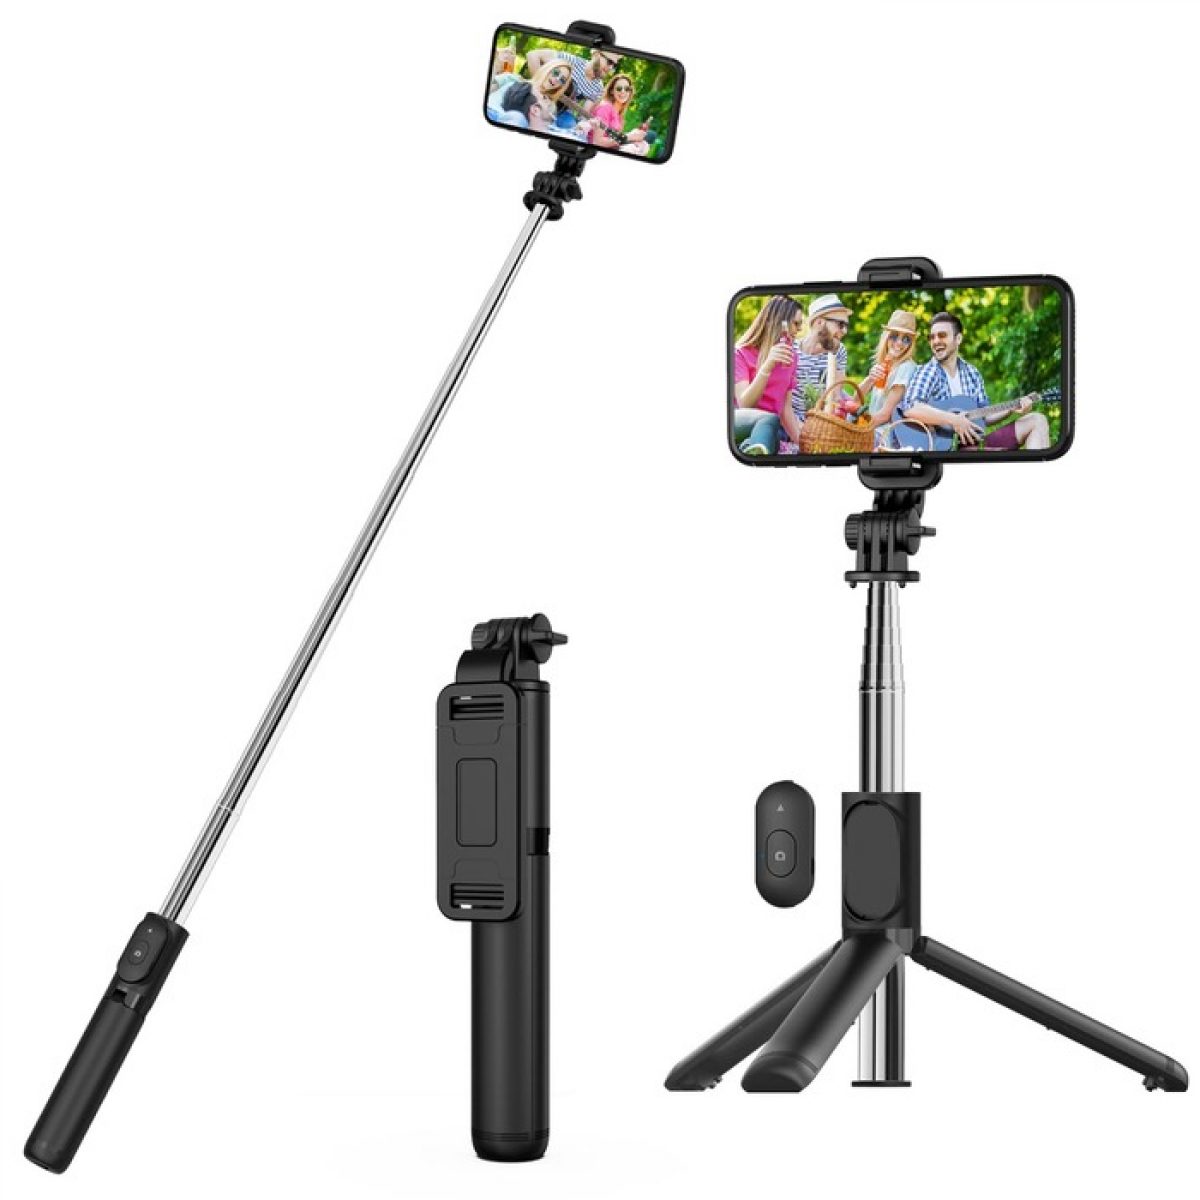 Assembling Your Promark Monopod Selfie Stick: A Step-by-Step Guide